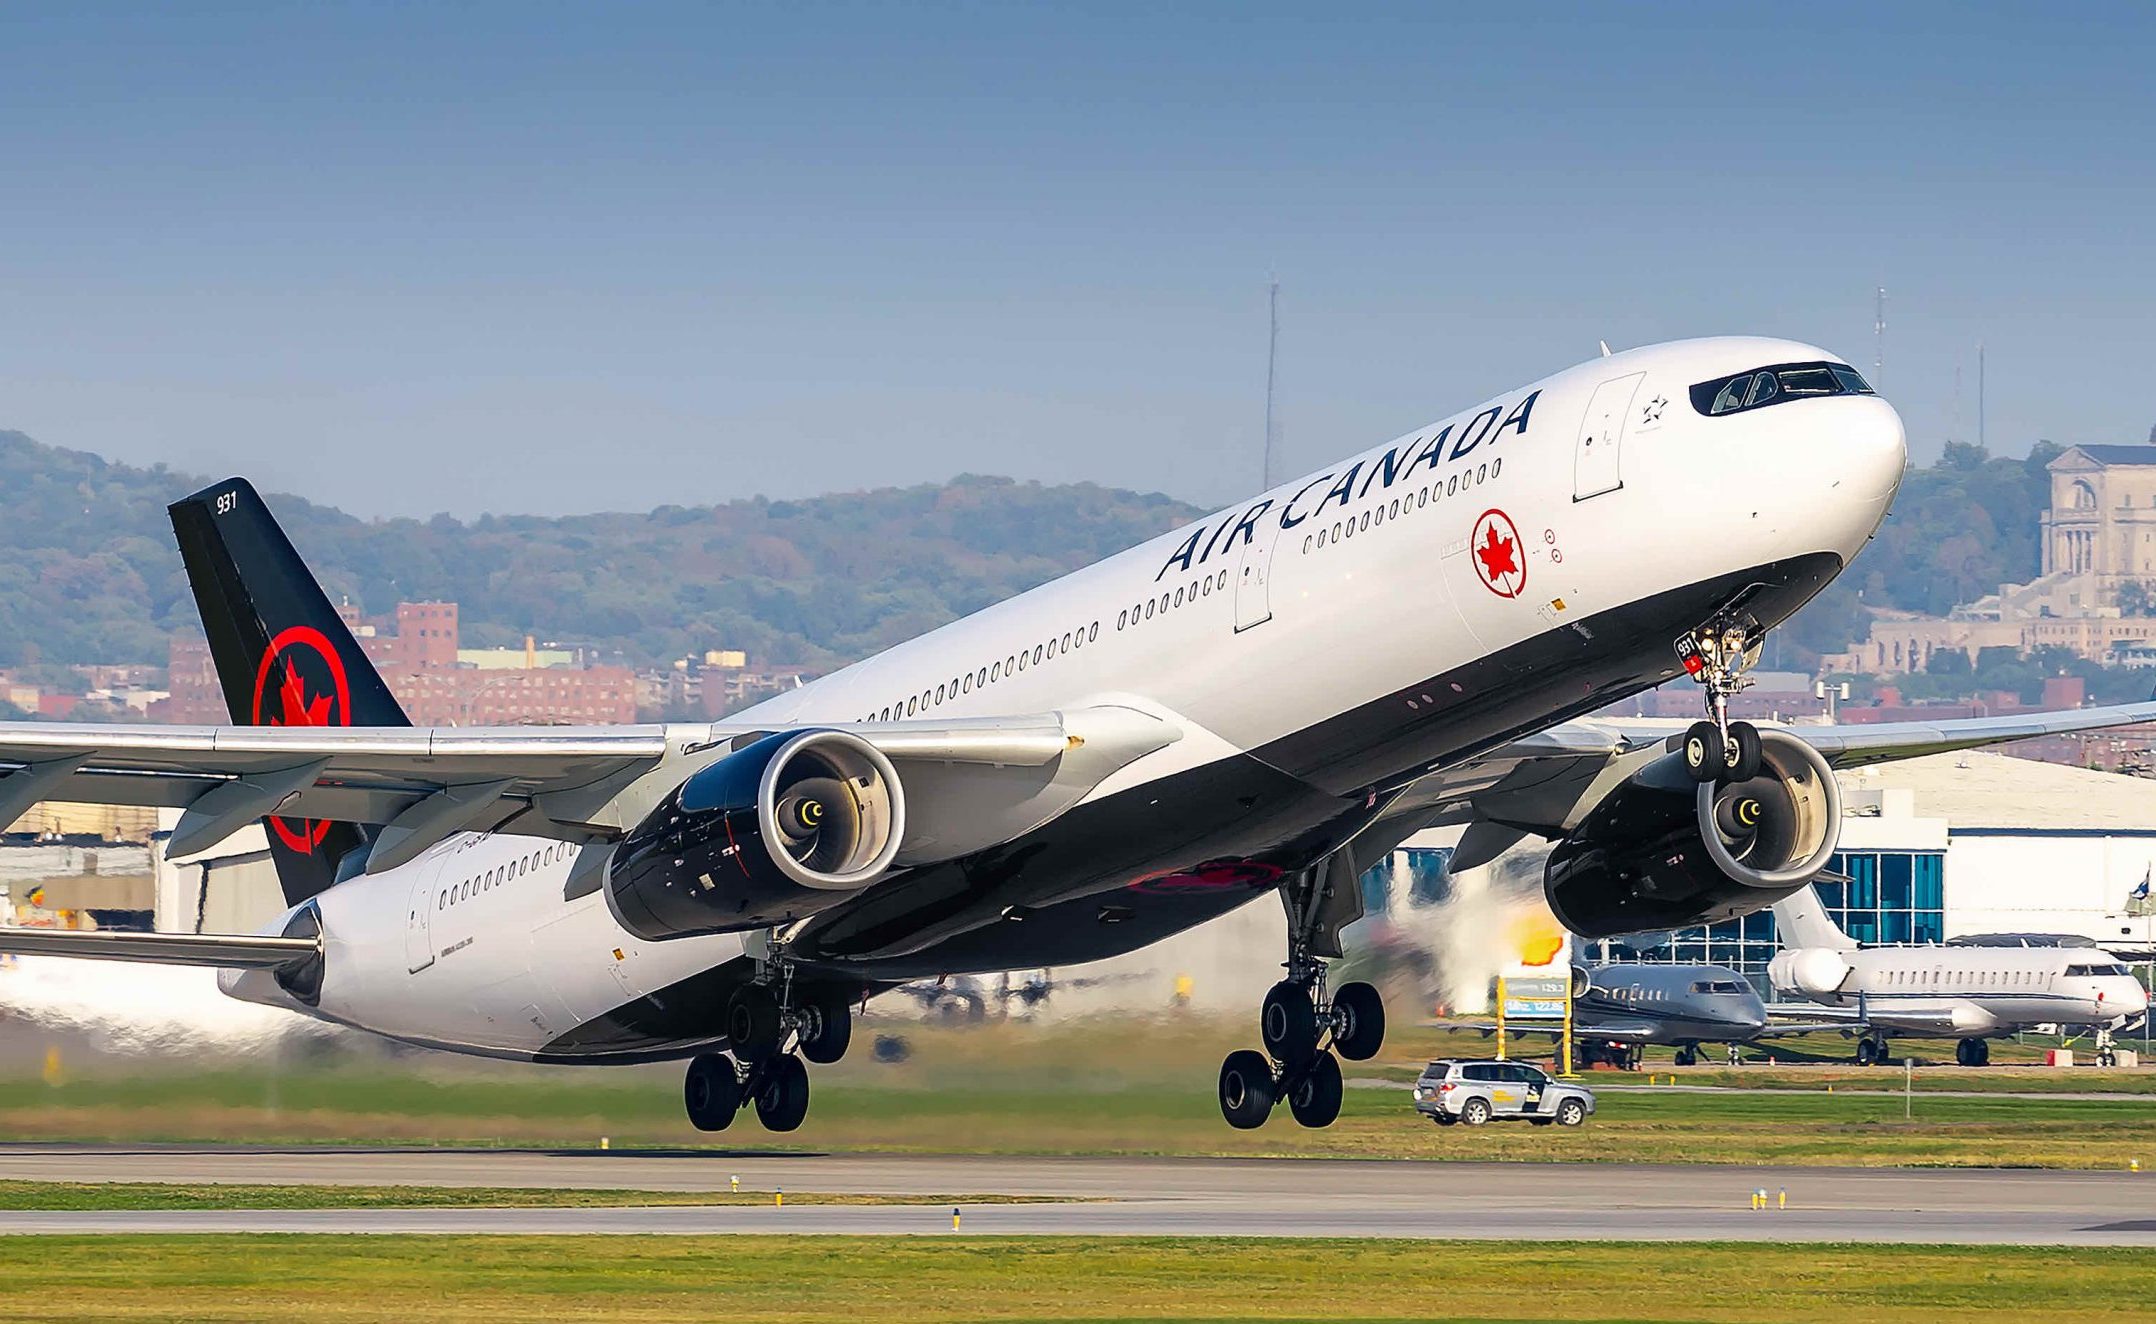 Strong cargo revenue for Air Canada in Q2